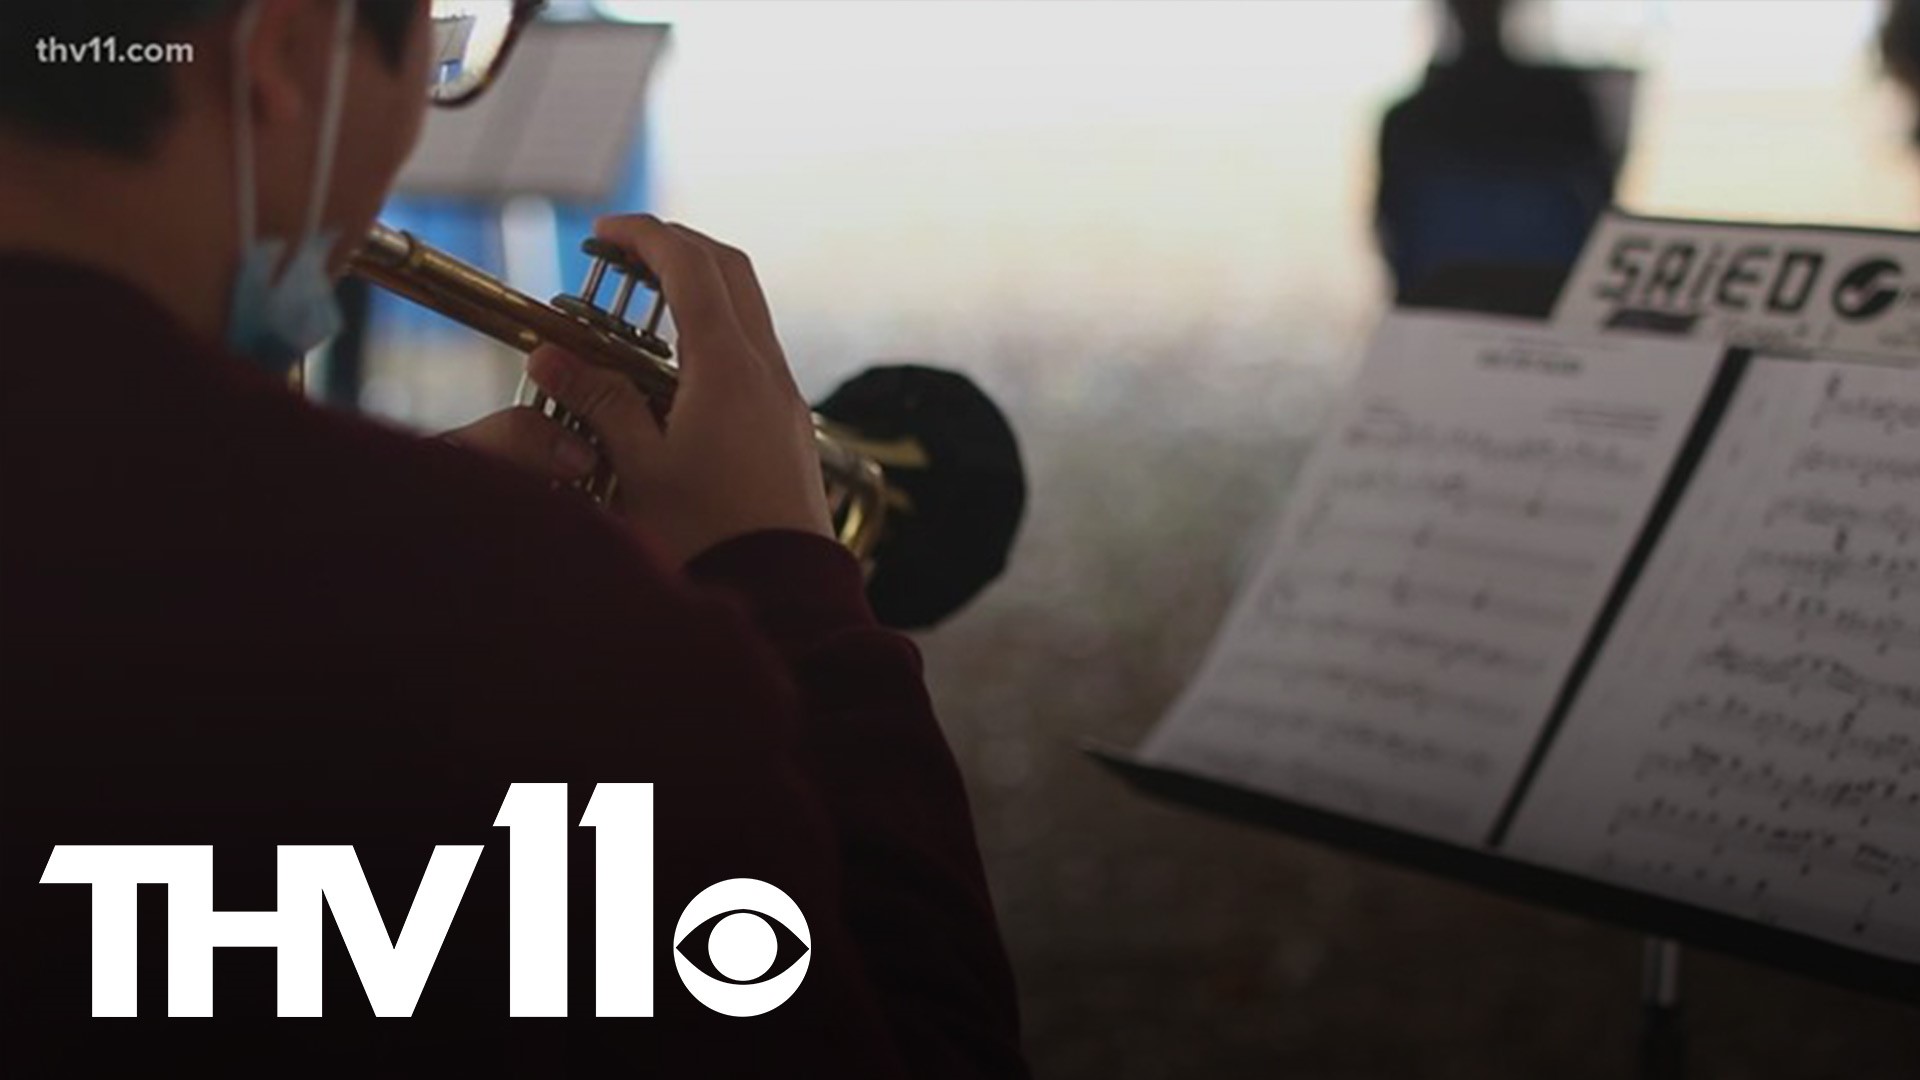 As the pandemic continues, some are getting creating to stay safe and let the show go on. UA-Little Rock band students are learning to adapt.